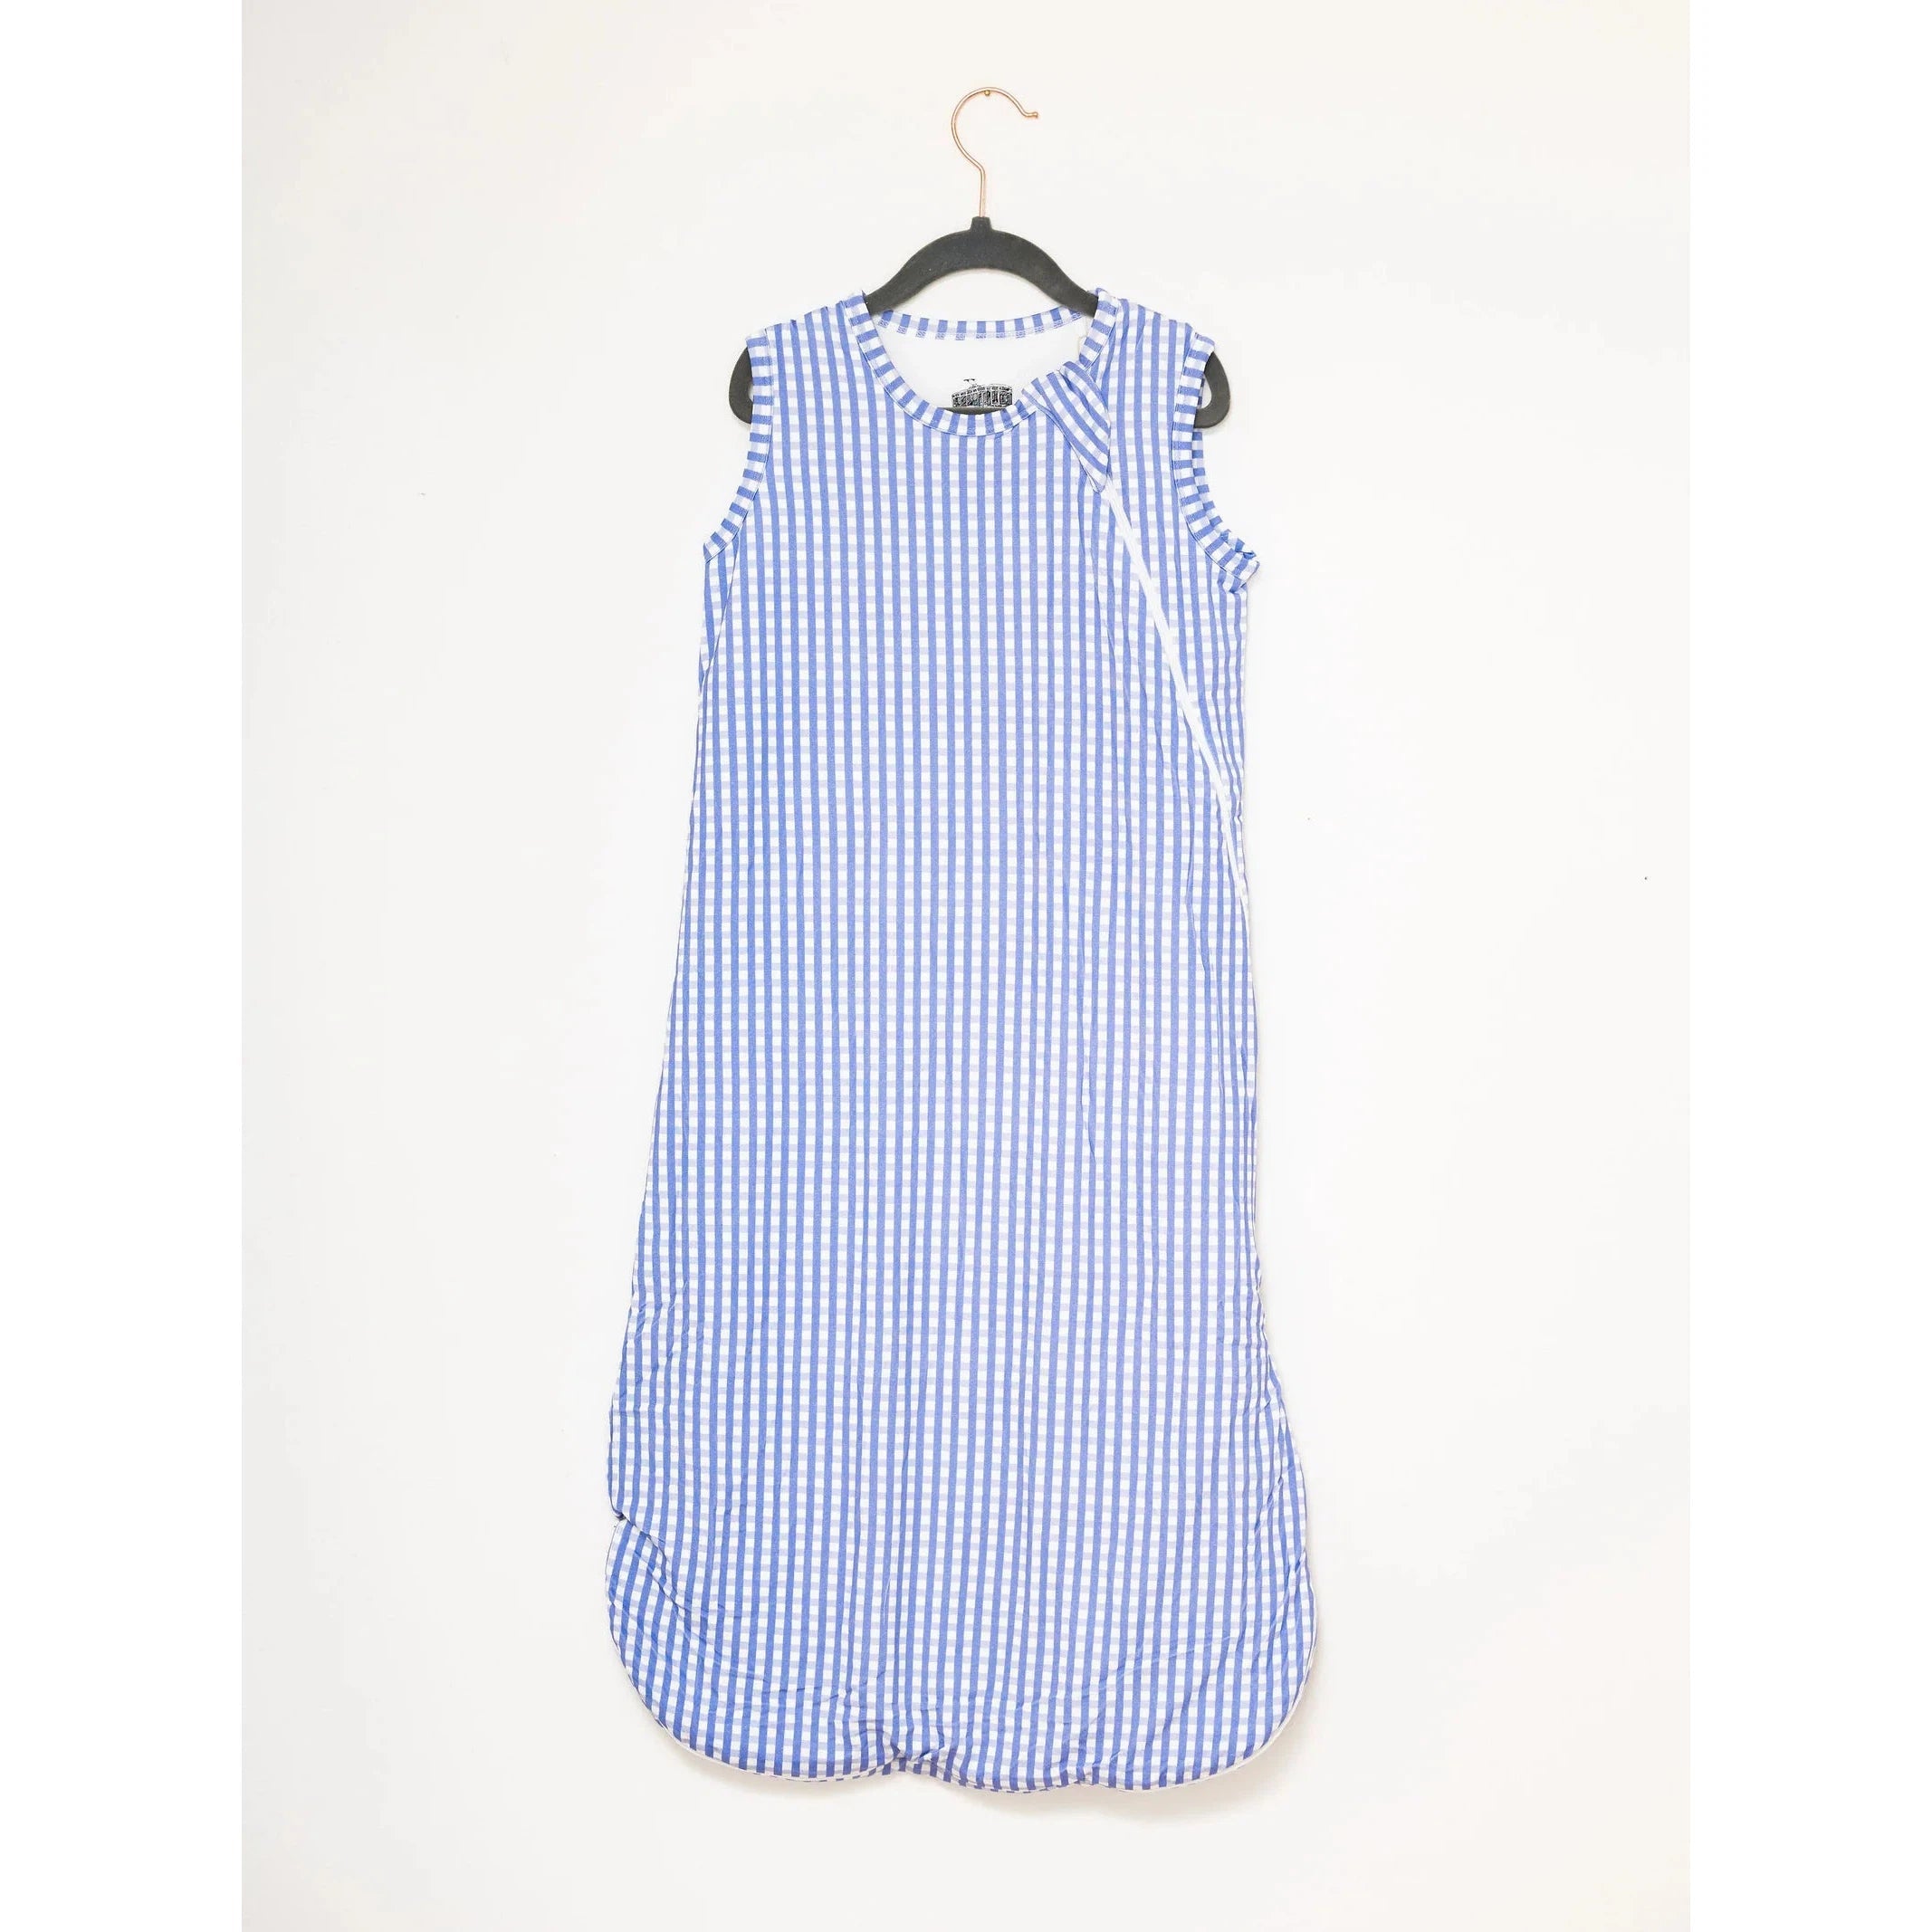 The Uptown Baby A+ Sleep Bag - Blue Gingham-The Uptown Baby-Little Giant Kidz